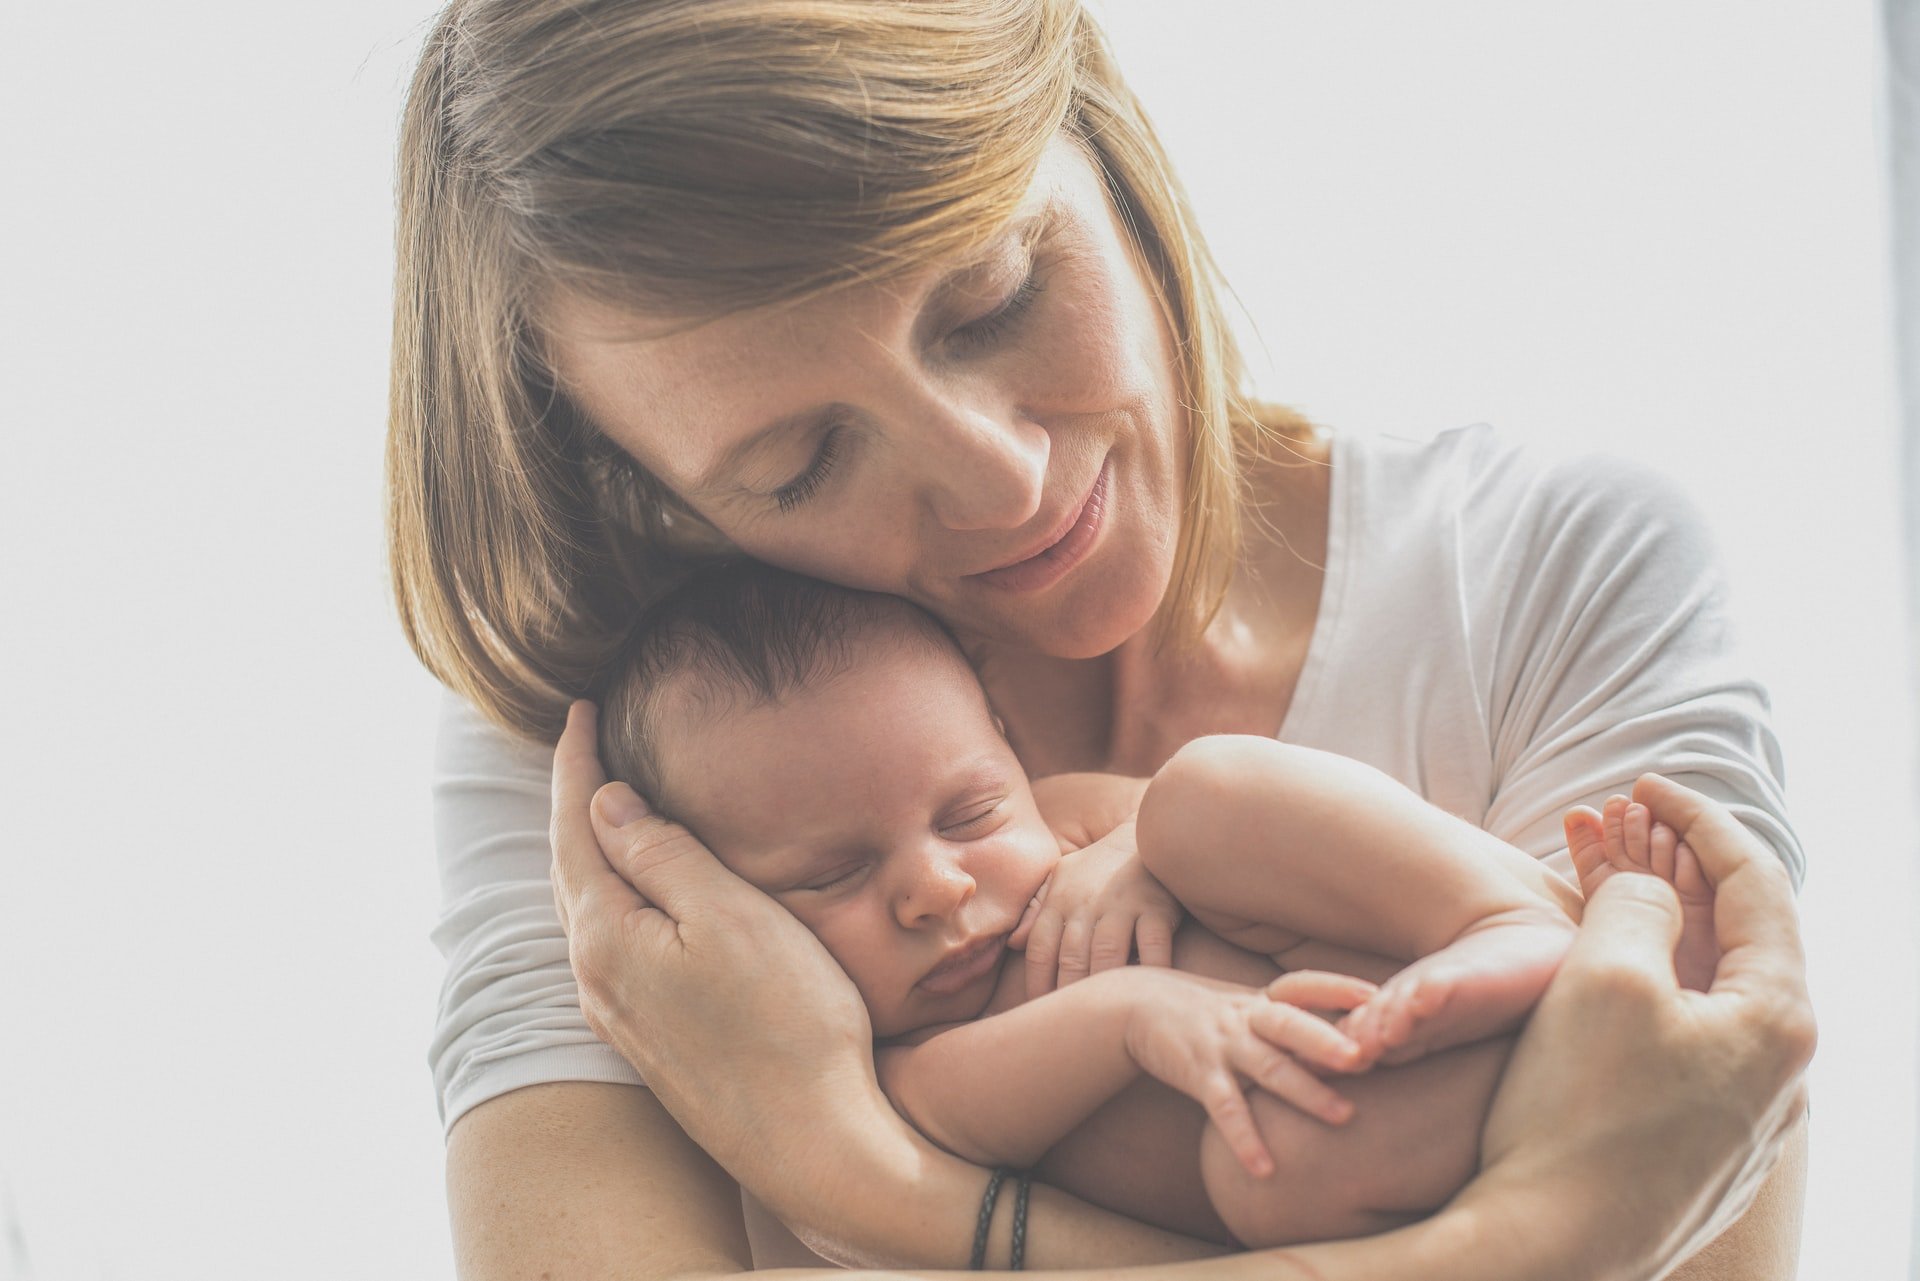 Mother-in-law holding her grandchild | Source: Unsplash